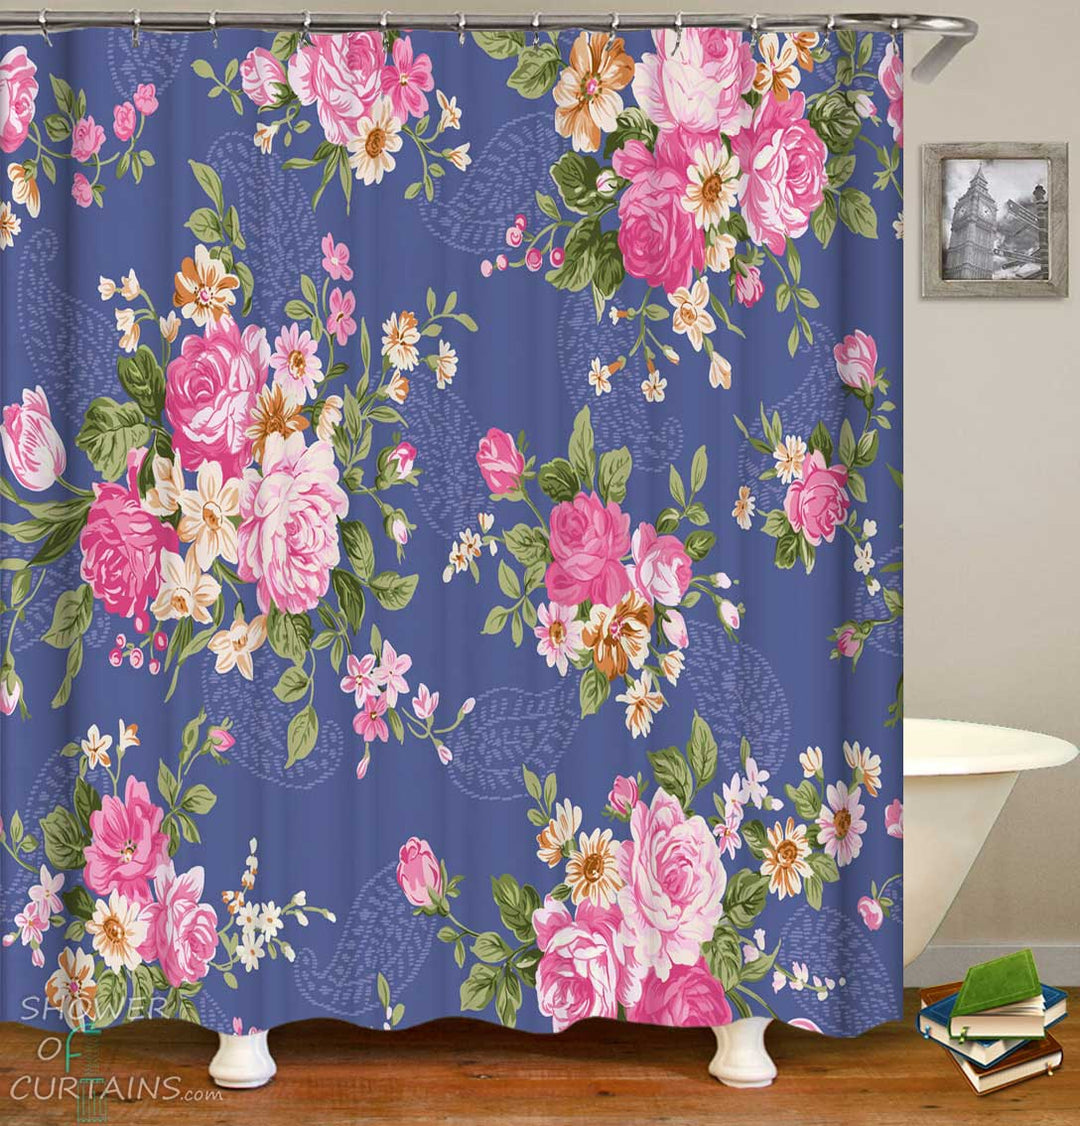 Shower Curtains with Roses over Paisley